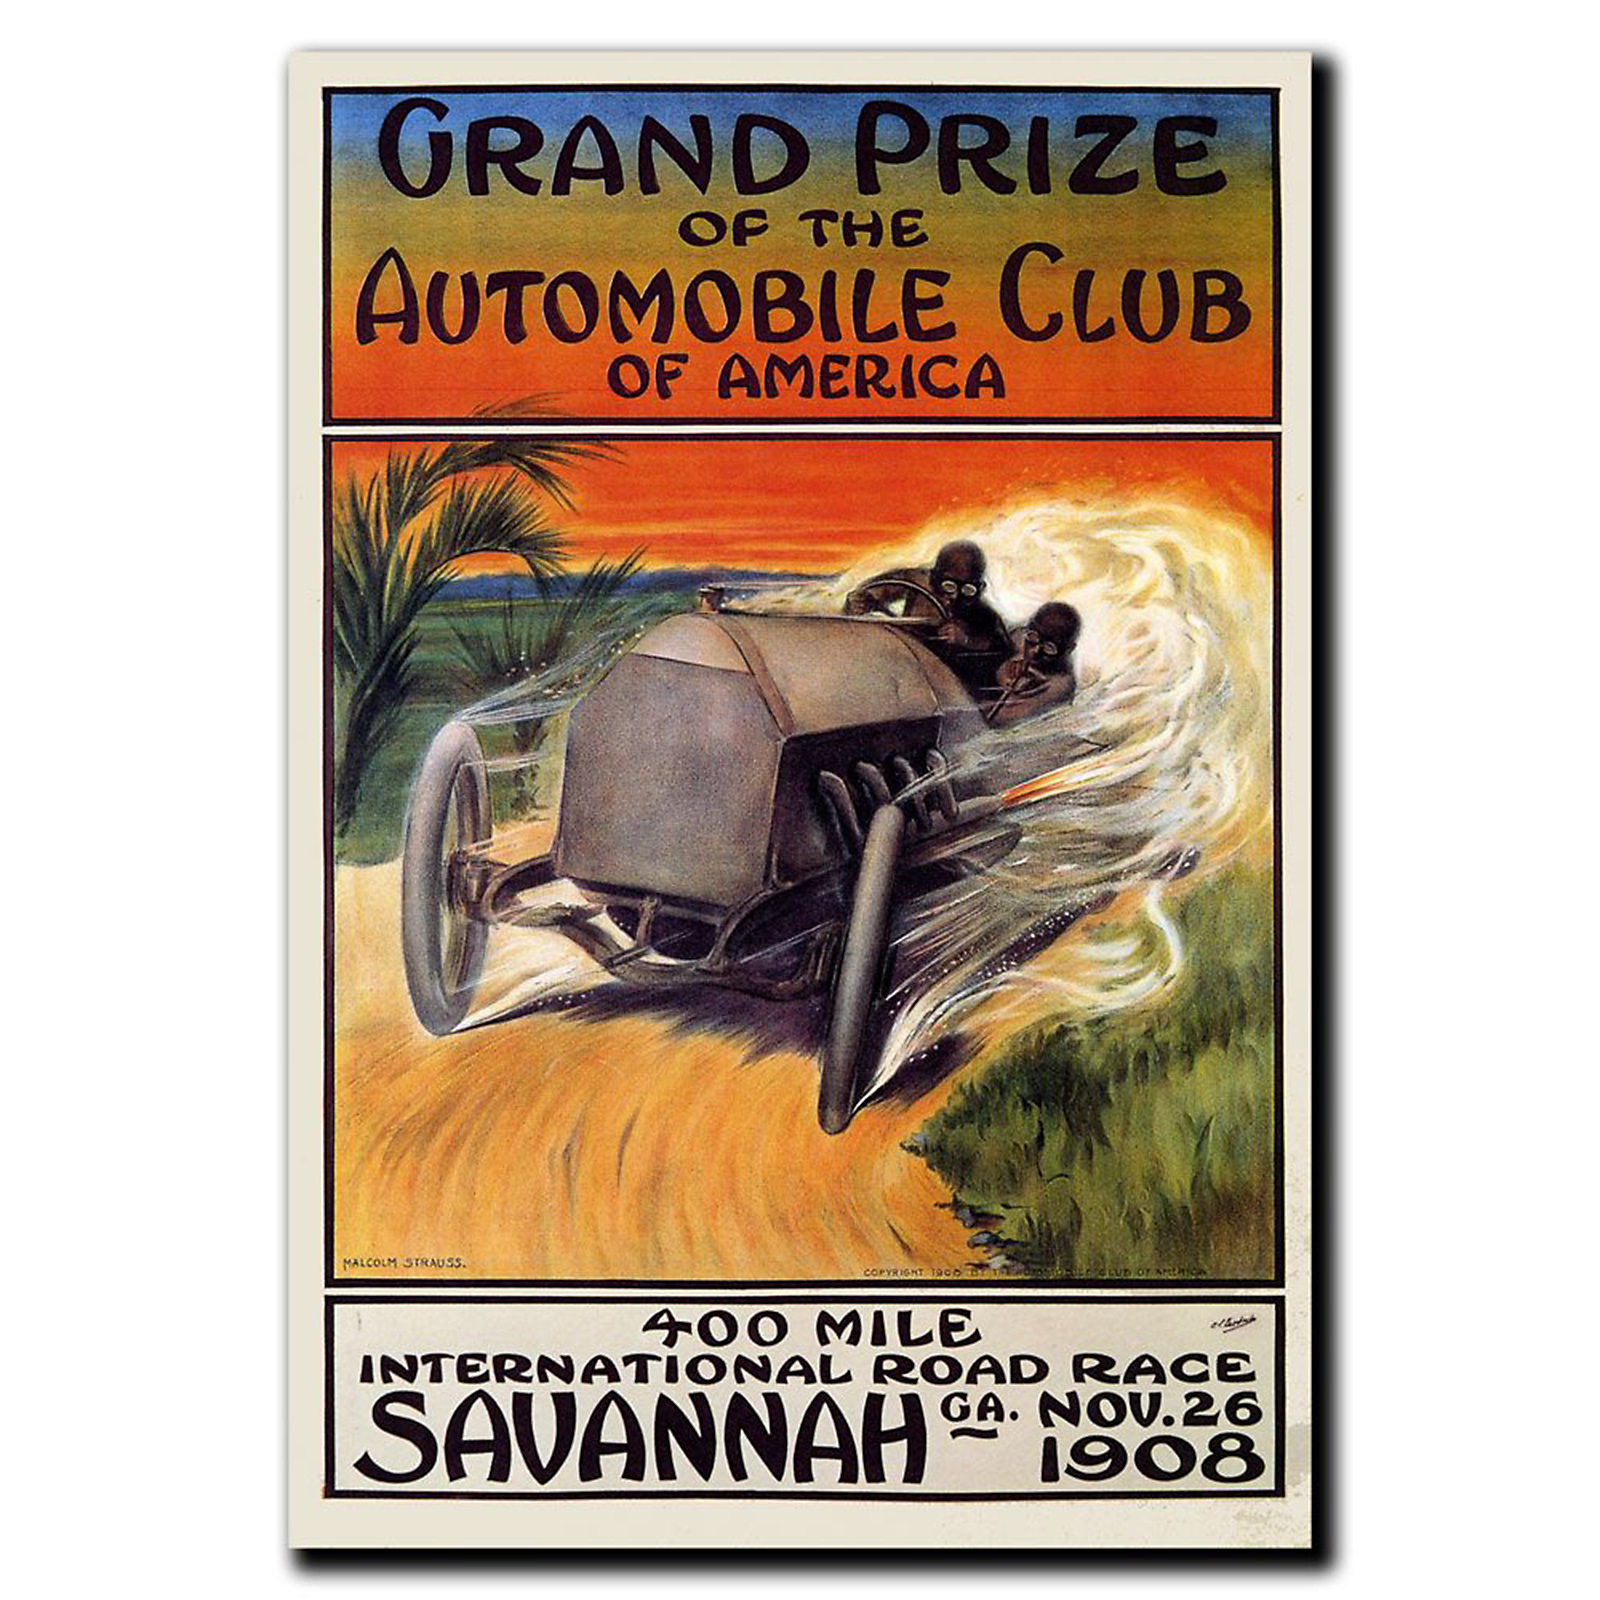 Trademark Global 35x47 inches "Grand Prize of the Automobile Club of America" by Malcolm A